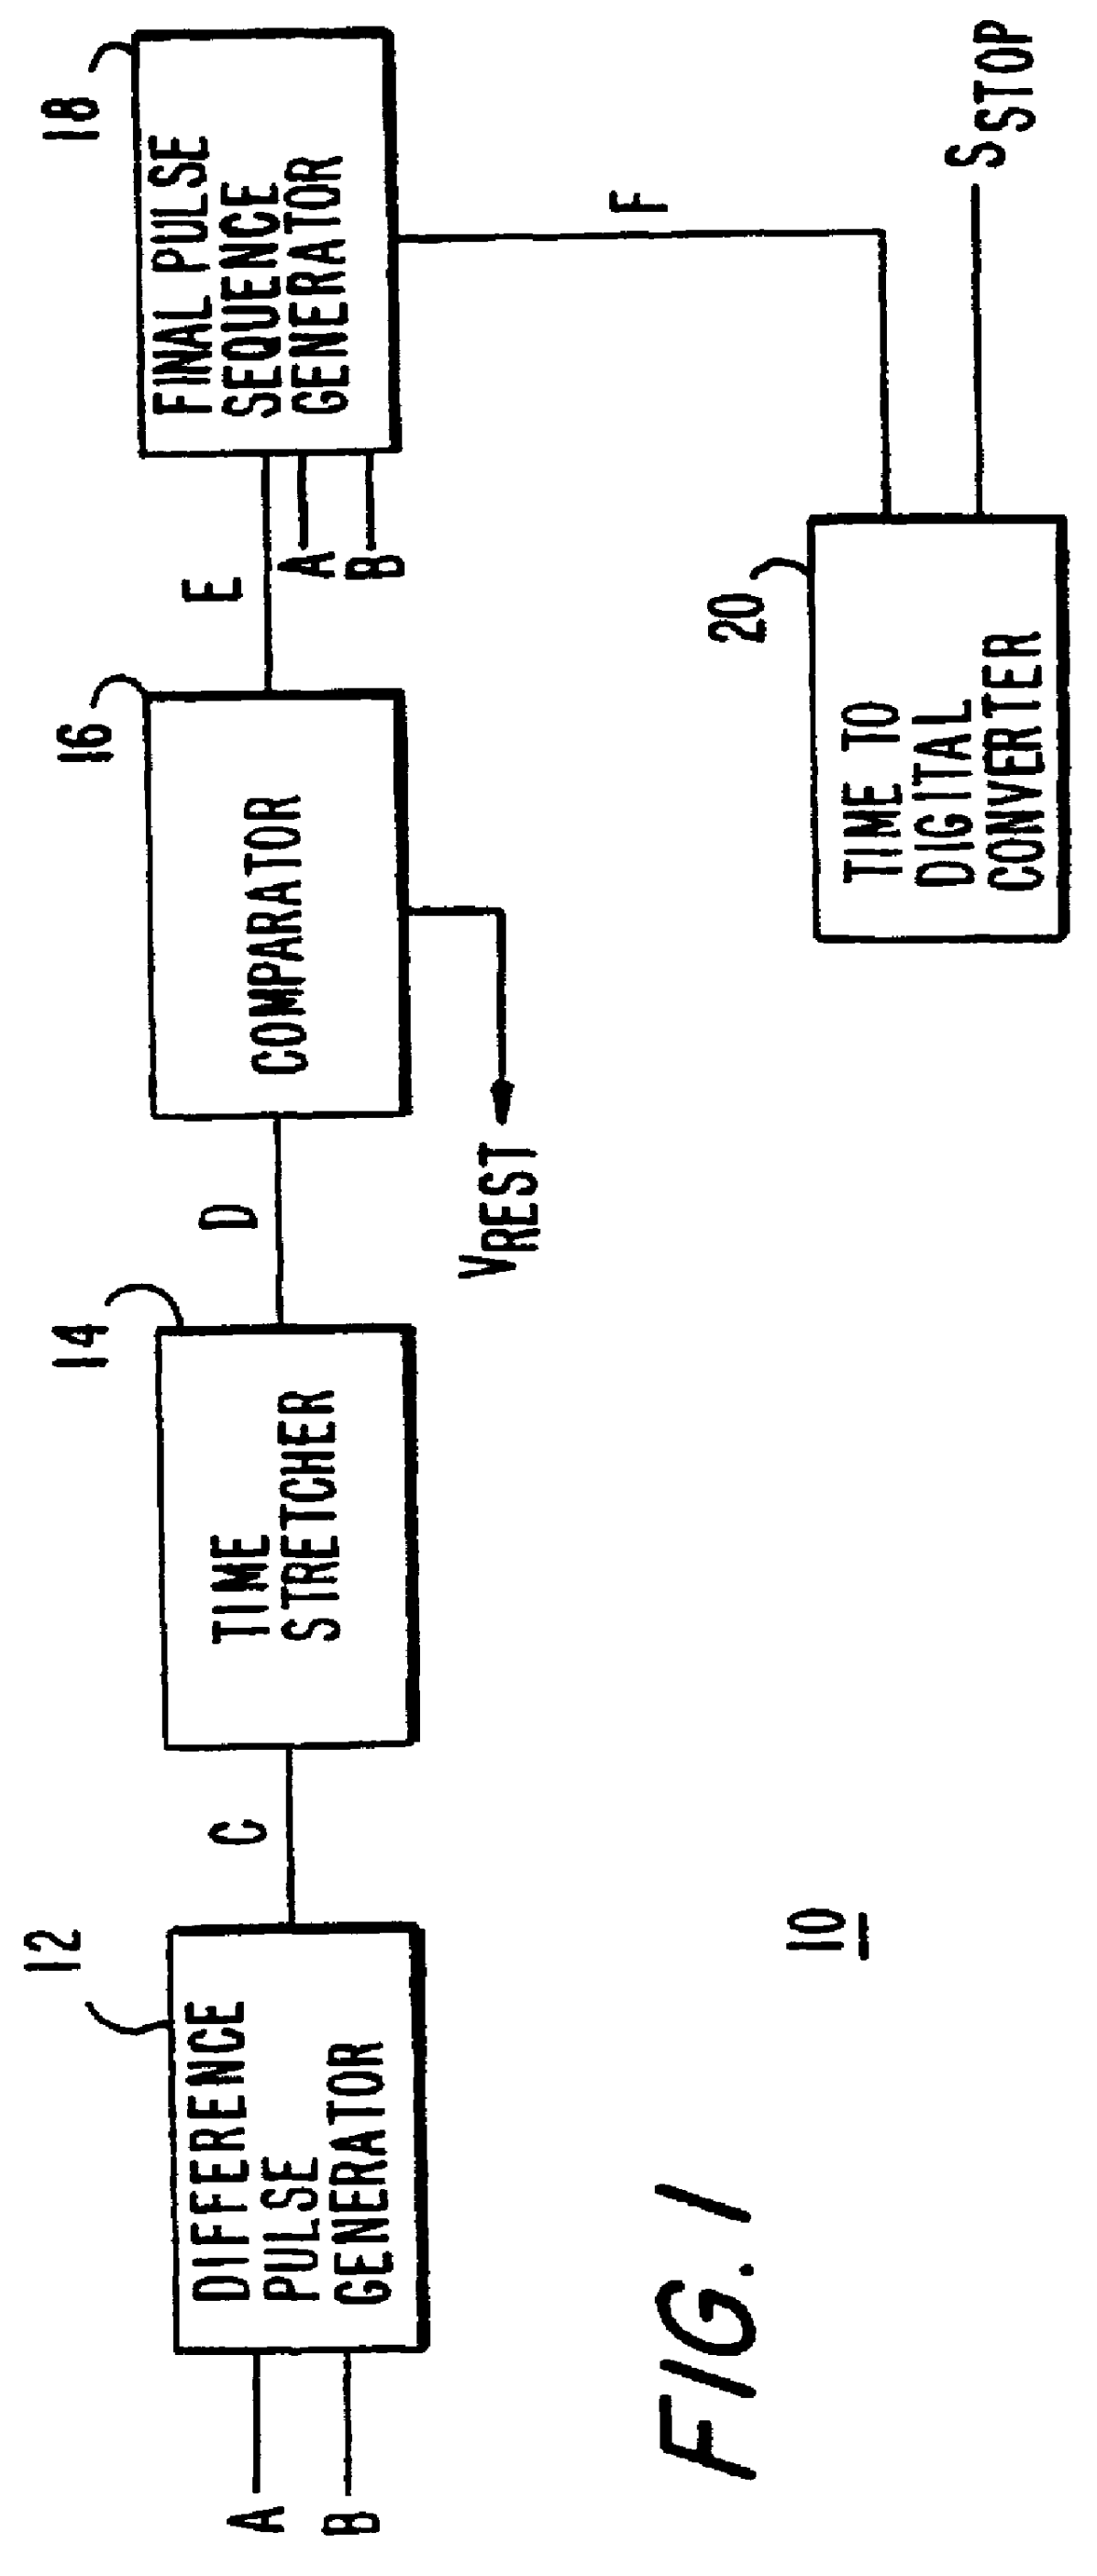 Apparatus and method for measuring time intervals with very high resolution